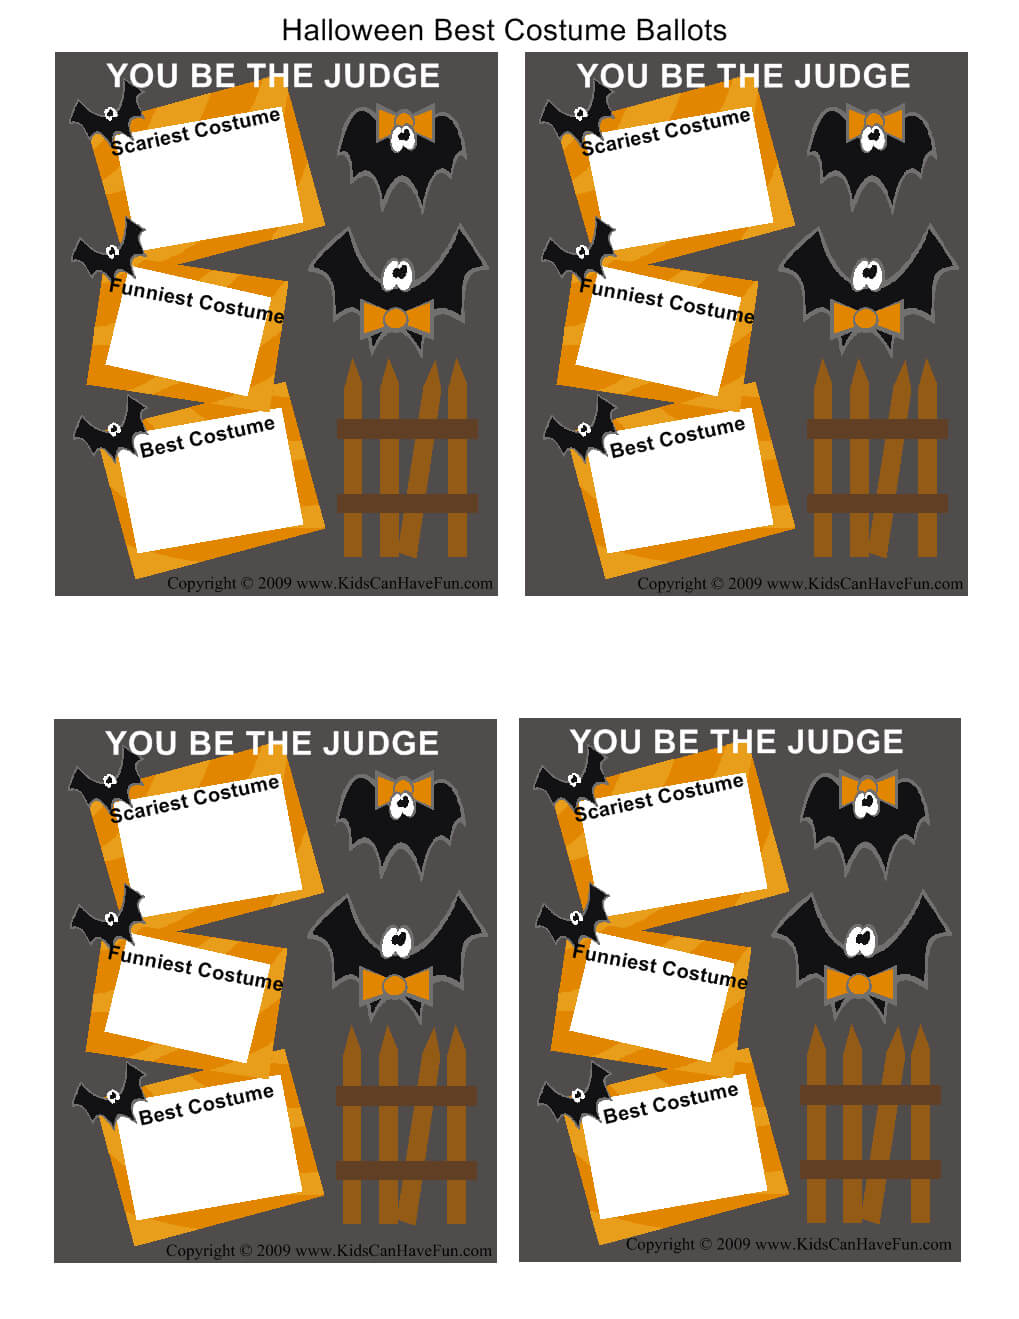 Best Costume Ballots | A Candy Corn Halloween Party 2013 Intended For Halloween Costume Certificate Template